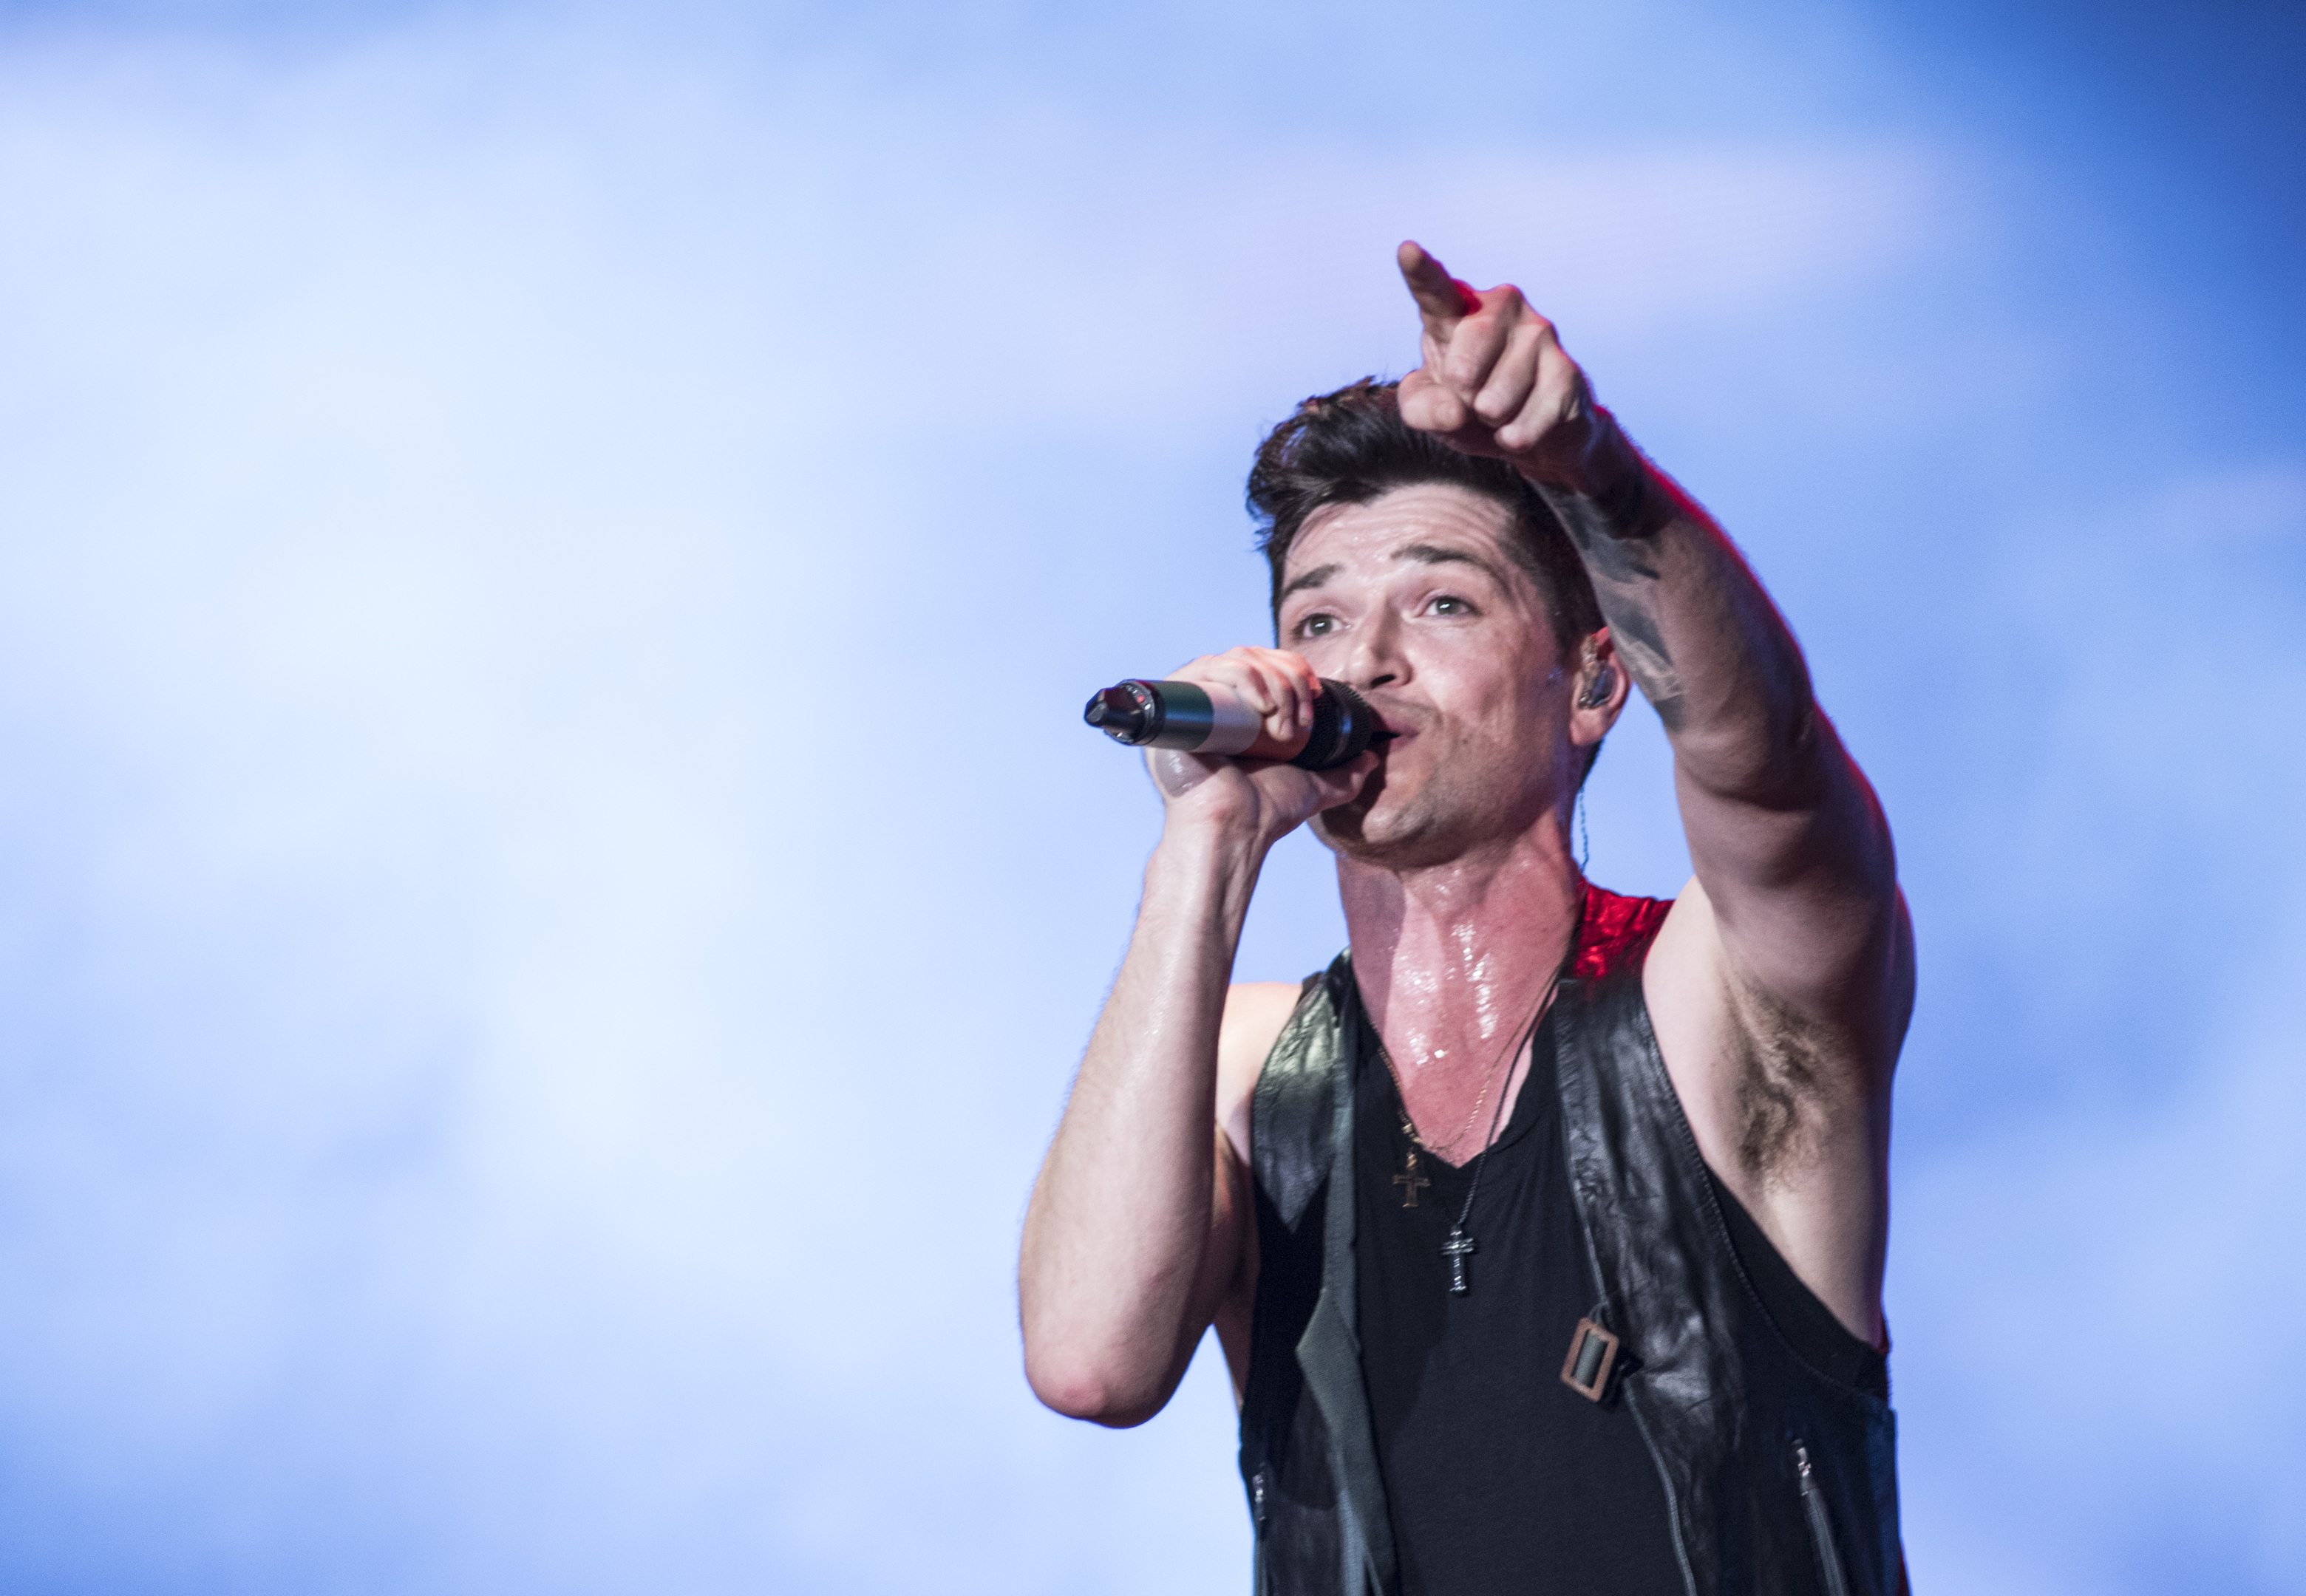 Danny O'Donoghue on stage (Raphael Dias/Getty Images)